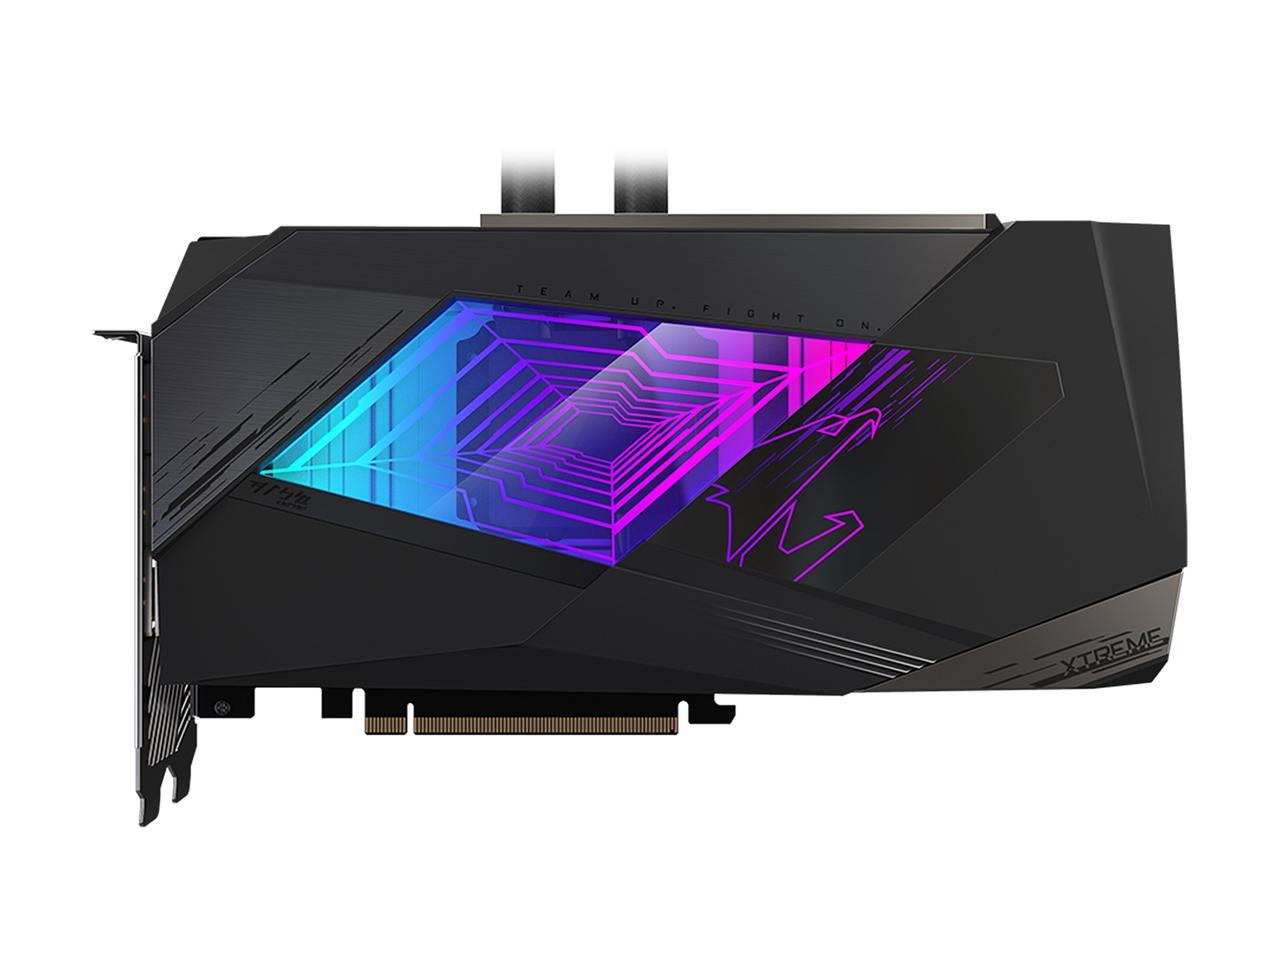 GIGABYTE AORUS GeForce RTX 3090 XTREME WATERFORCE 24G Graphics Card,  WATERFORCE All-in-One Cooling System, 24GB 384-bit GDDR6X, GV-N3090AORUSX  W-24GD 